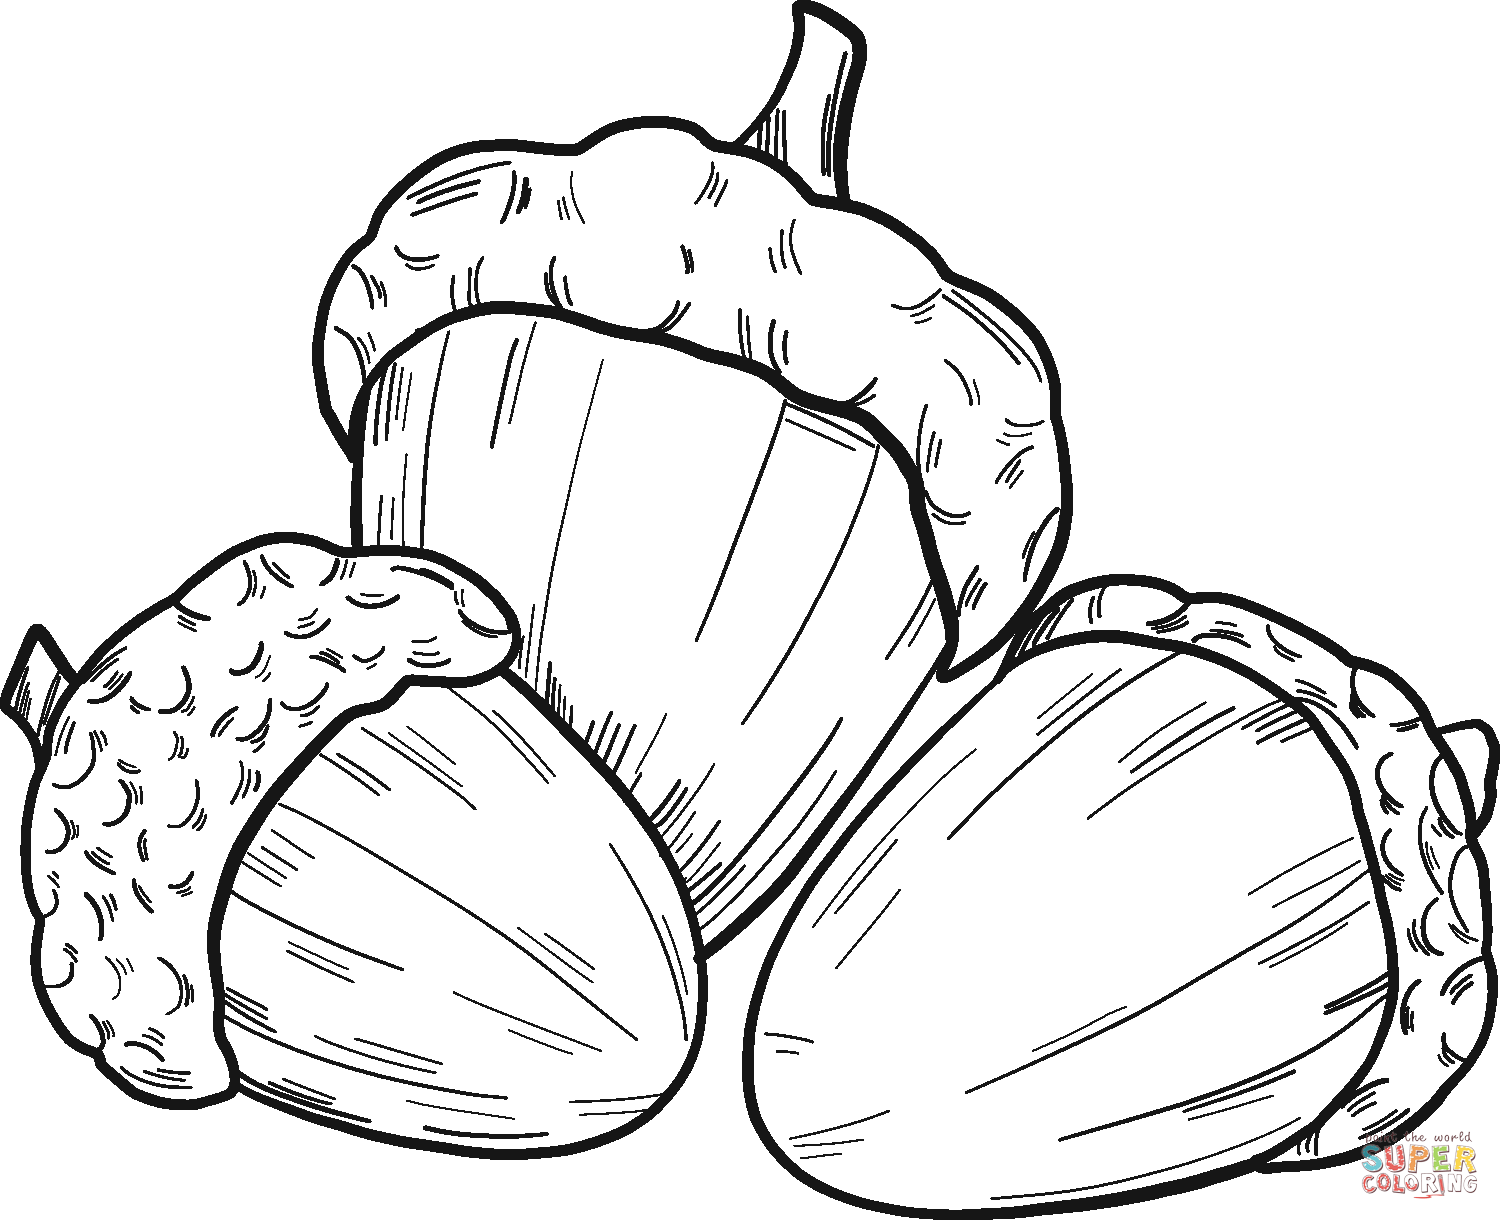 Acorns Coloring Pages   Fall Coloring Pages   Coloring Pages For ...